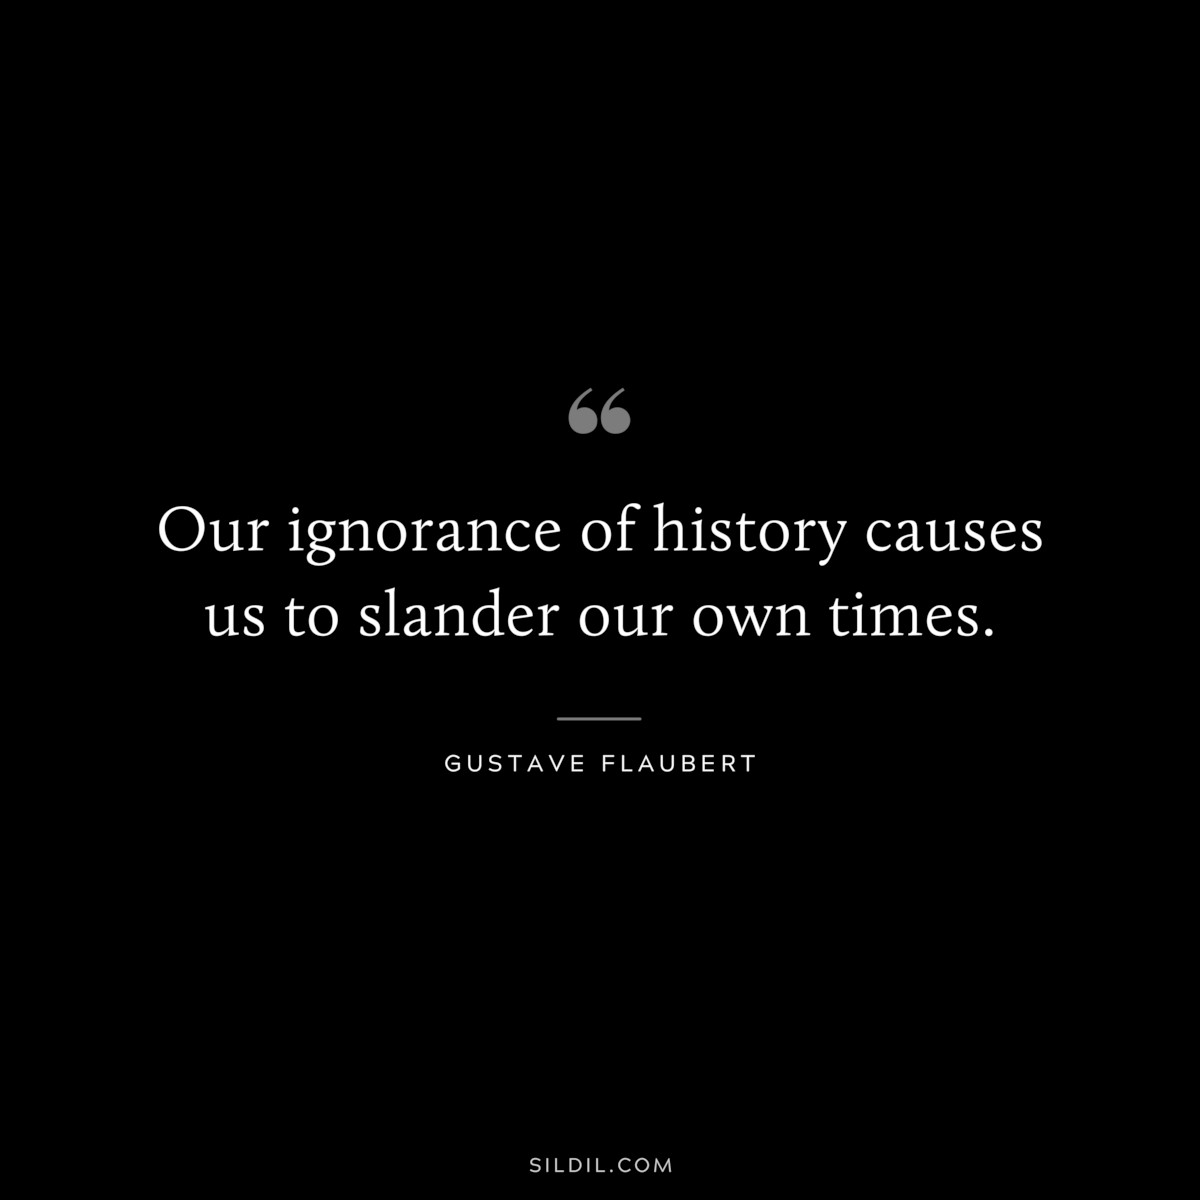 Our ignorance of history causes us to slander our own times. ― Gustave Flaubert